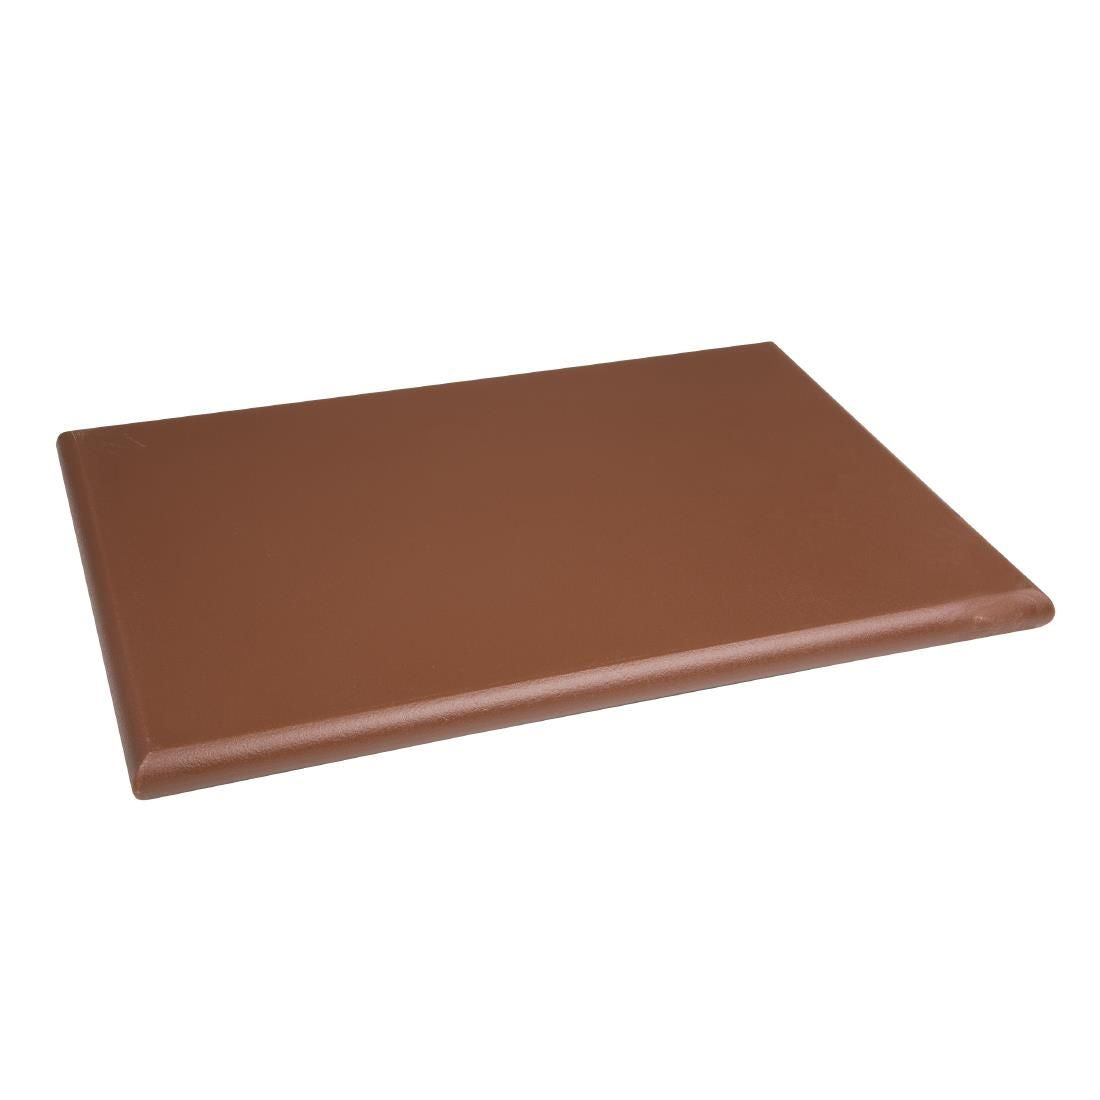 Hygiplas Extra Thick High Density Brown Chopping Board Standard JD Catering Equipment Solutions Ltd